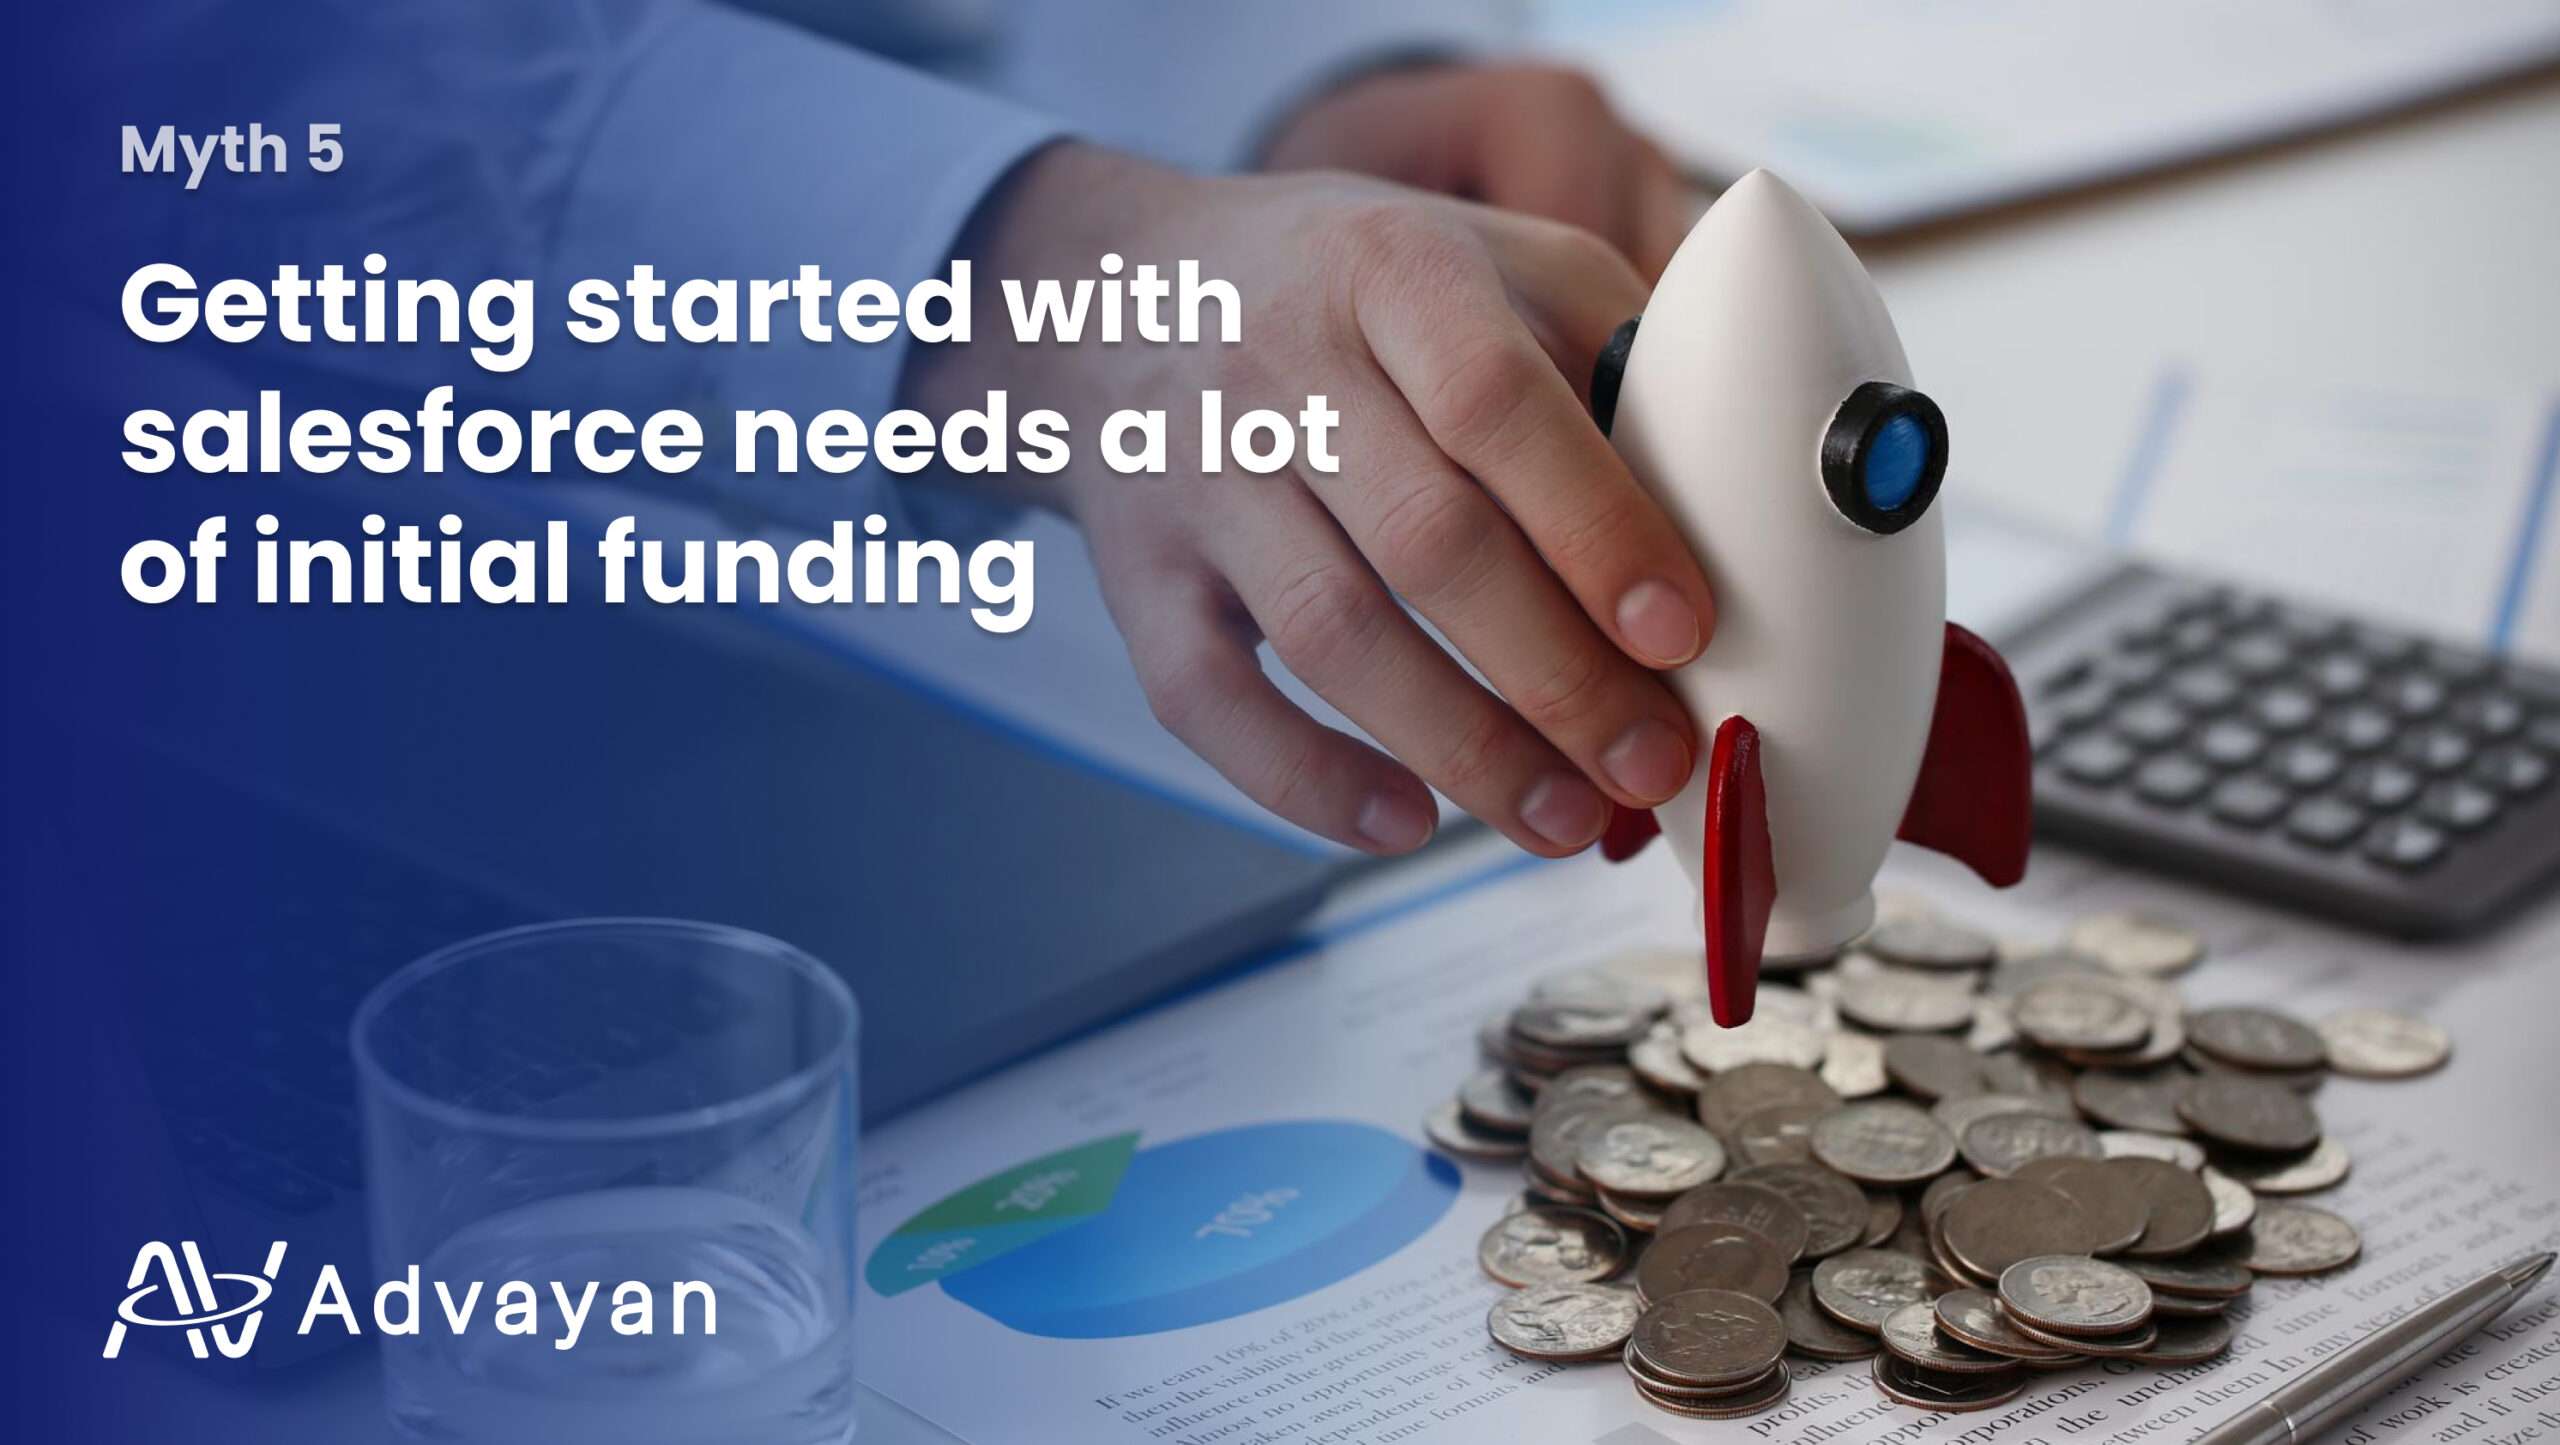 Myth 5 Getting started with salesforce needs a lot of initial funding